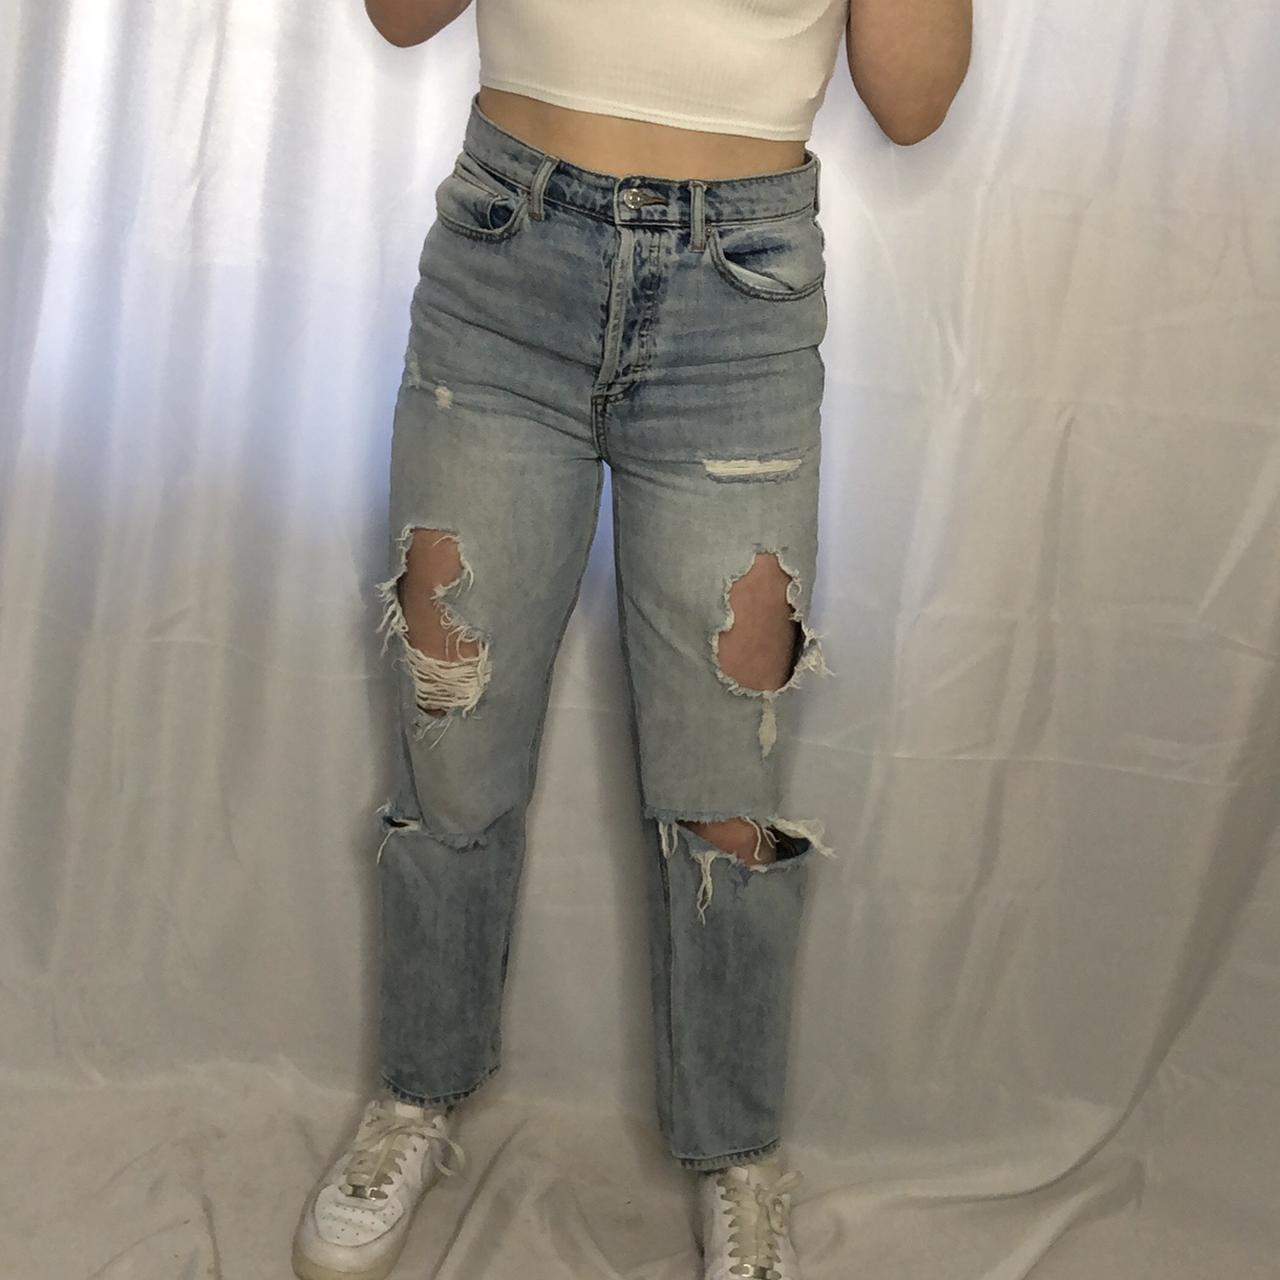 Product Image 1 - Distressed Urban Outfitters Jeans. Light